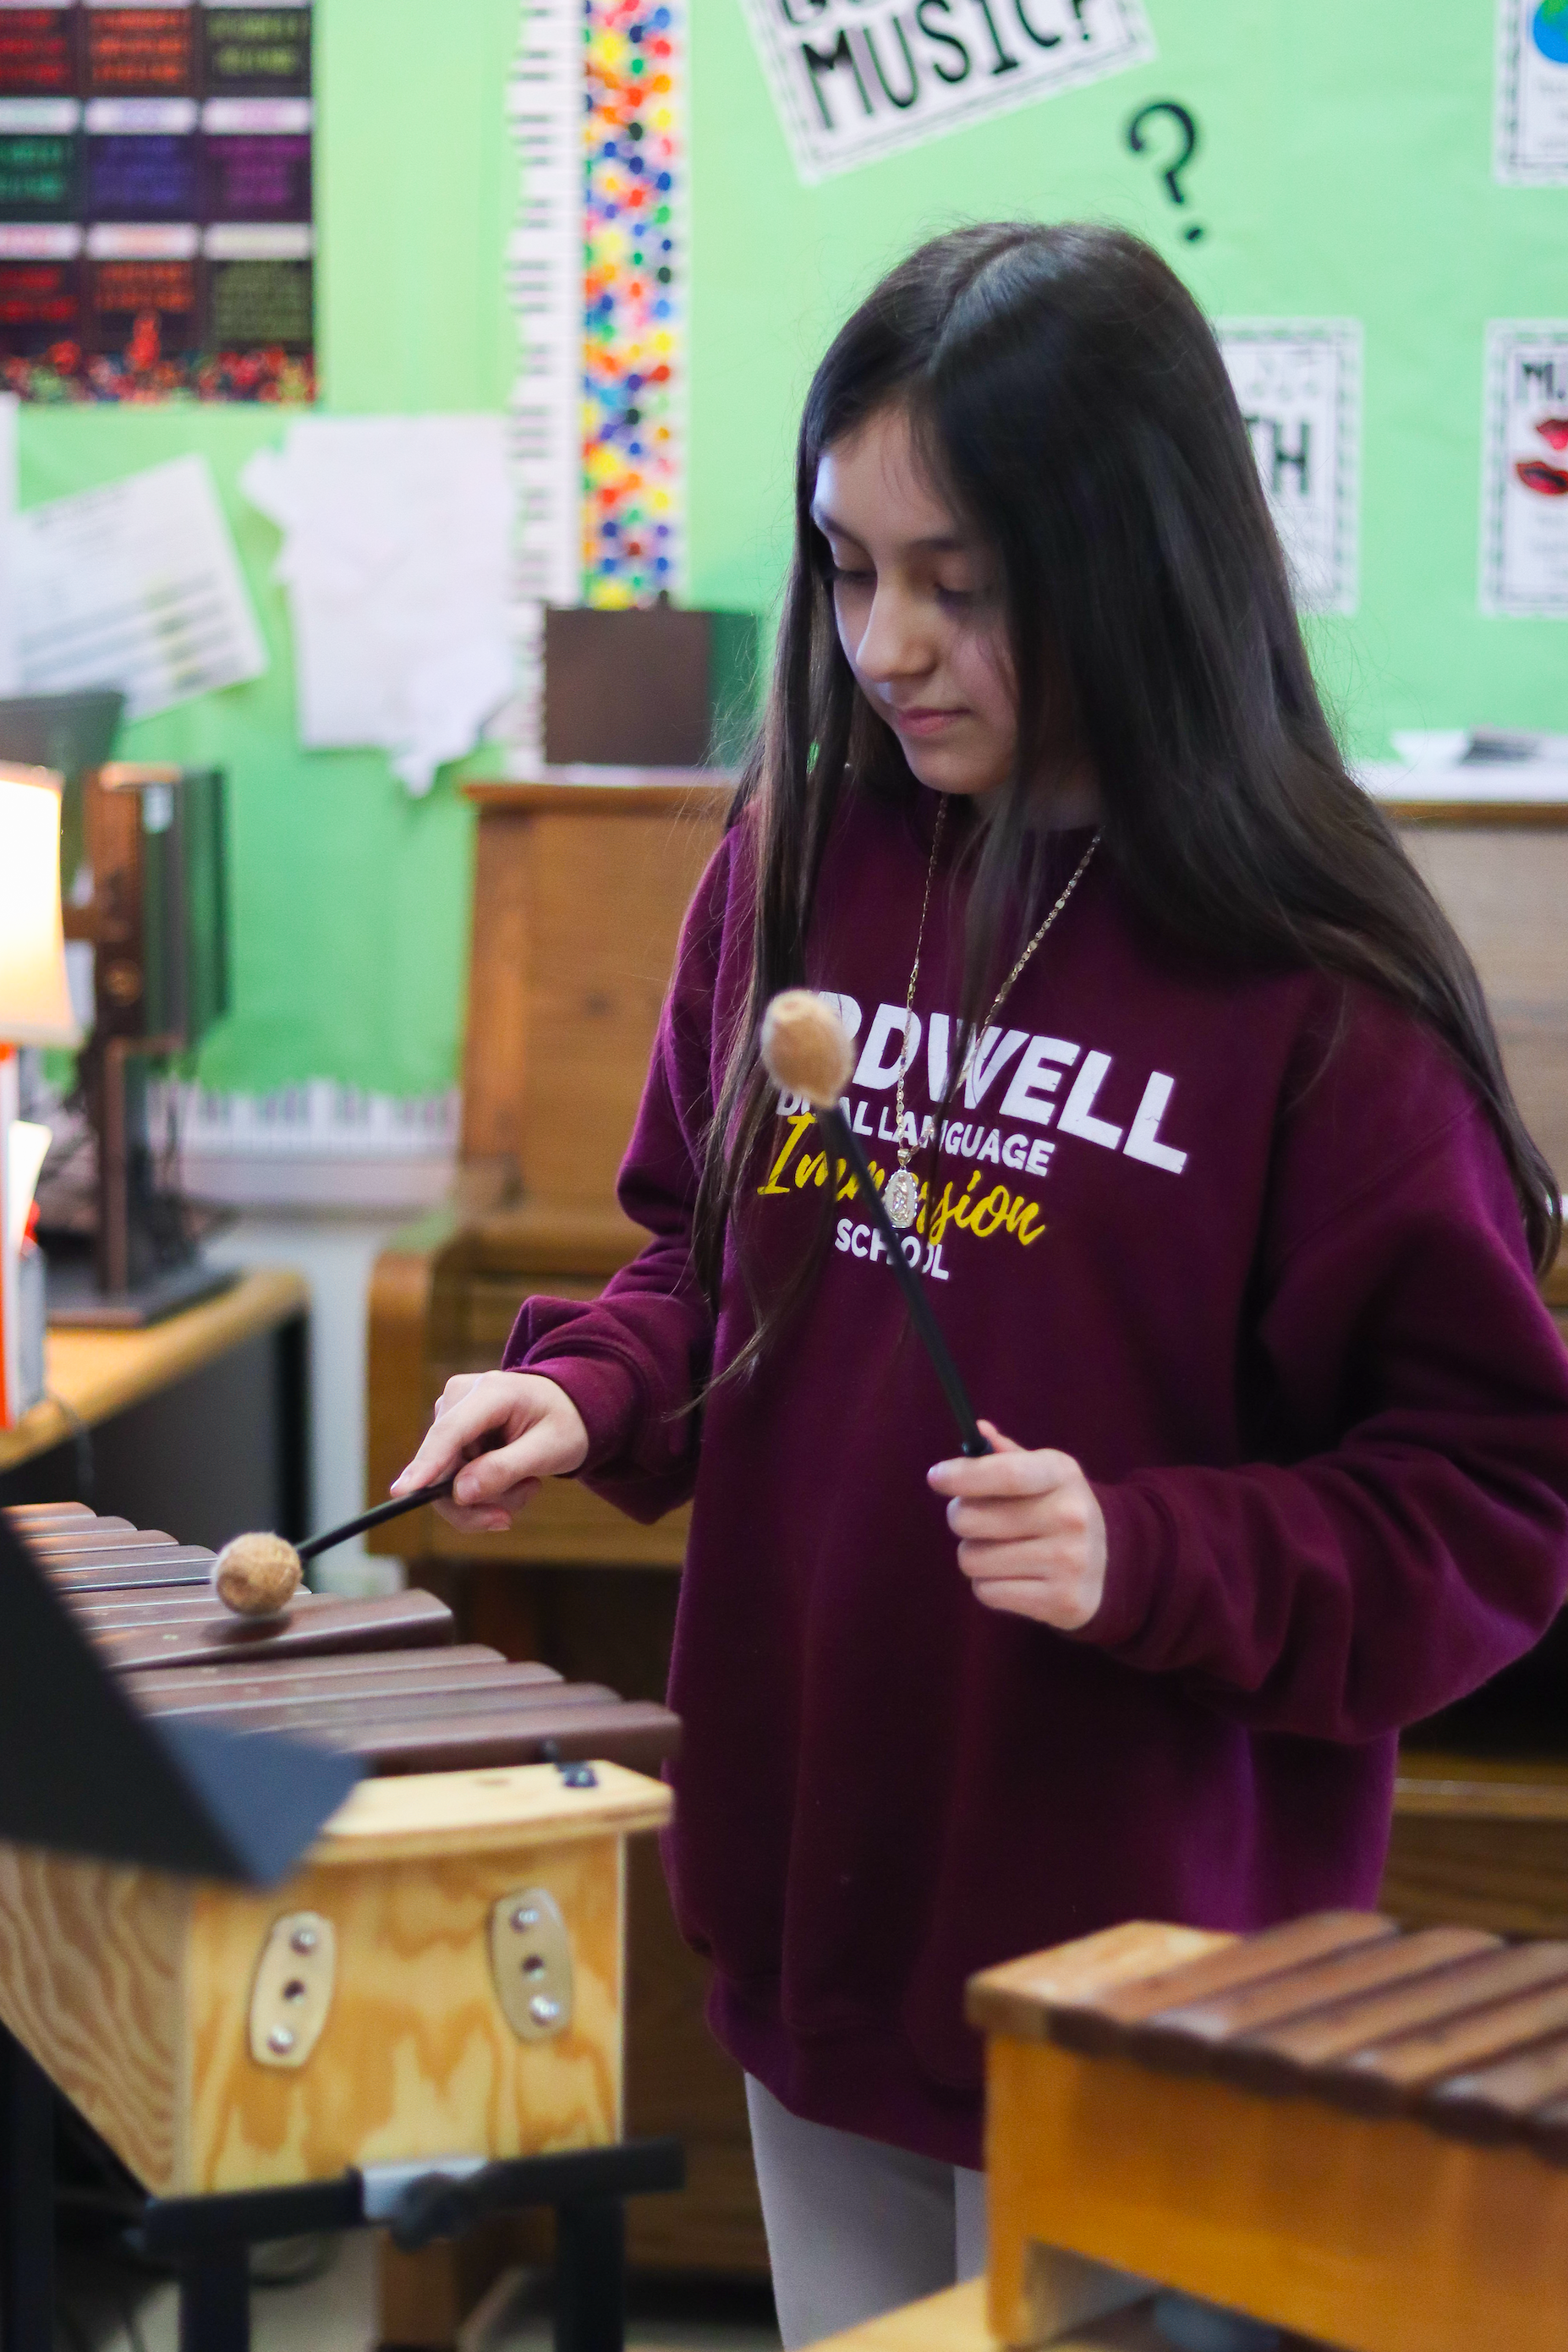 birdwell student playing instrument in percussion class